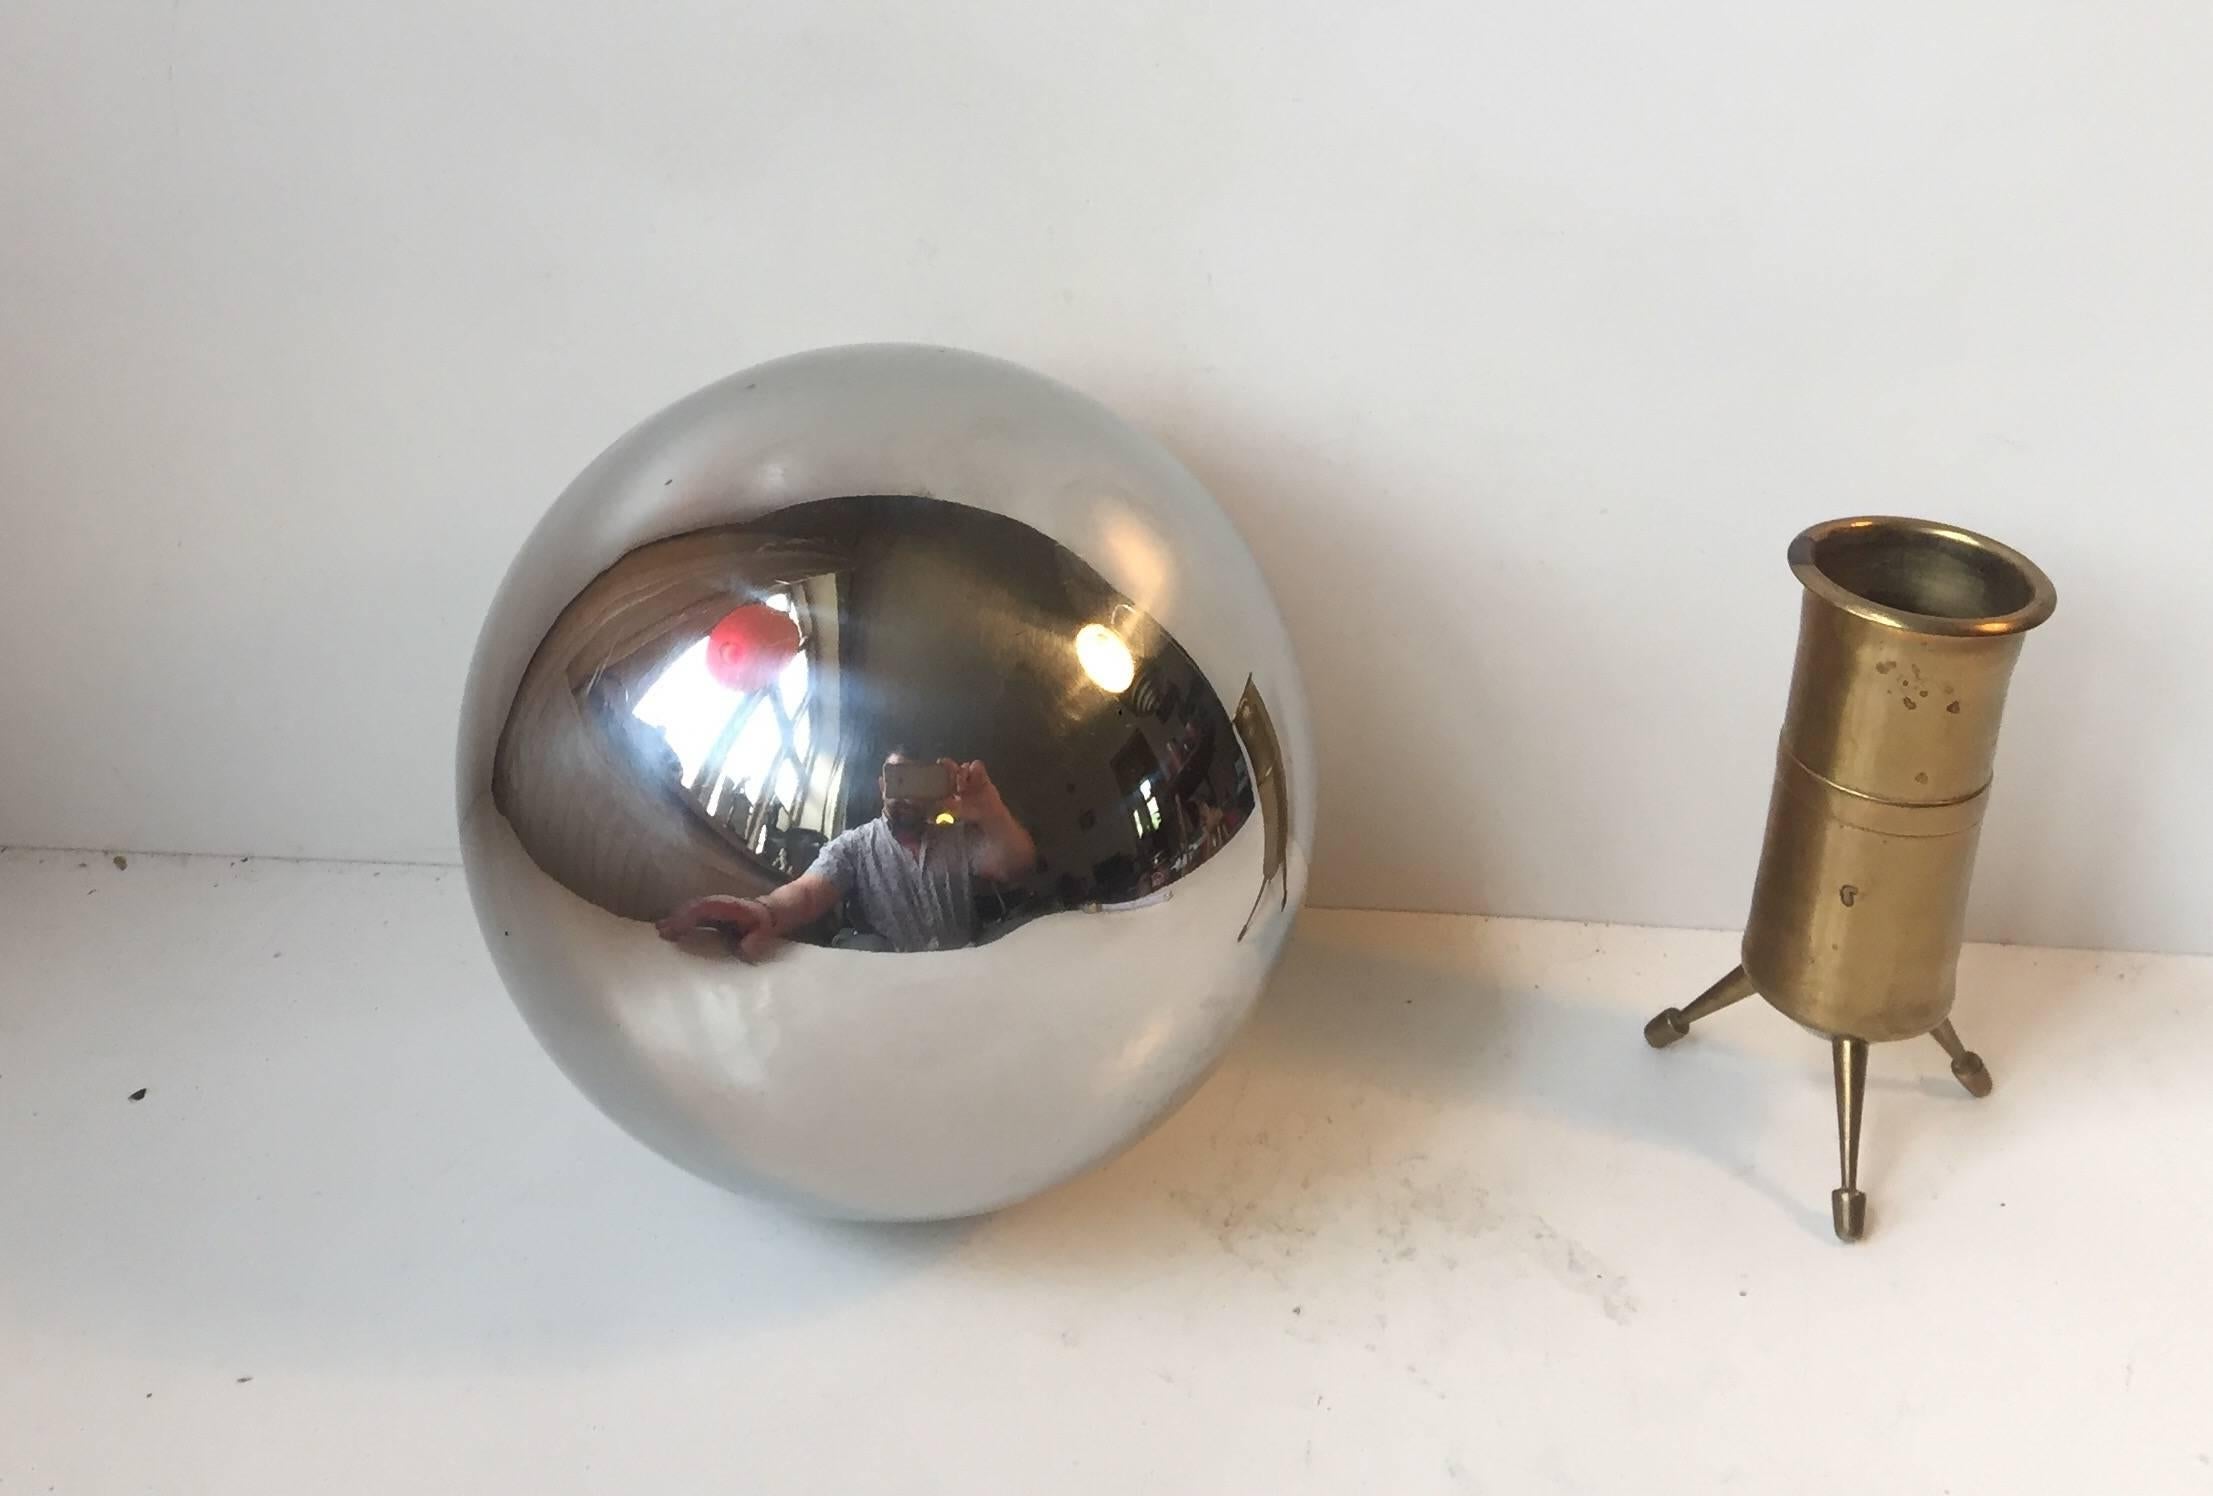 Mid-Century Modern Unusual Mirror Sphere on Tripod Brass Stand, Reflects the Entire Room